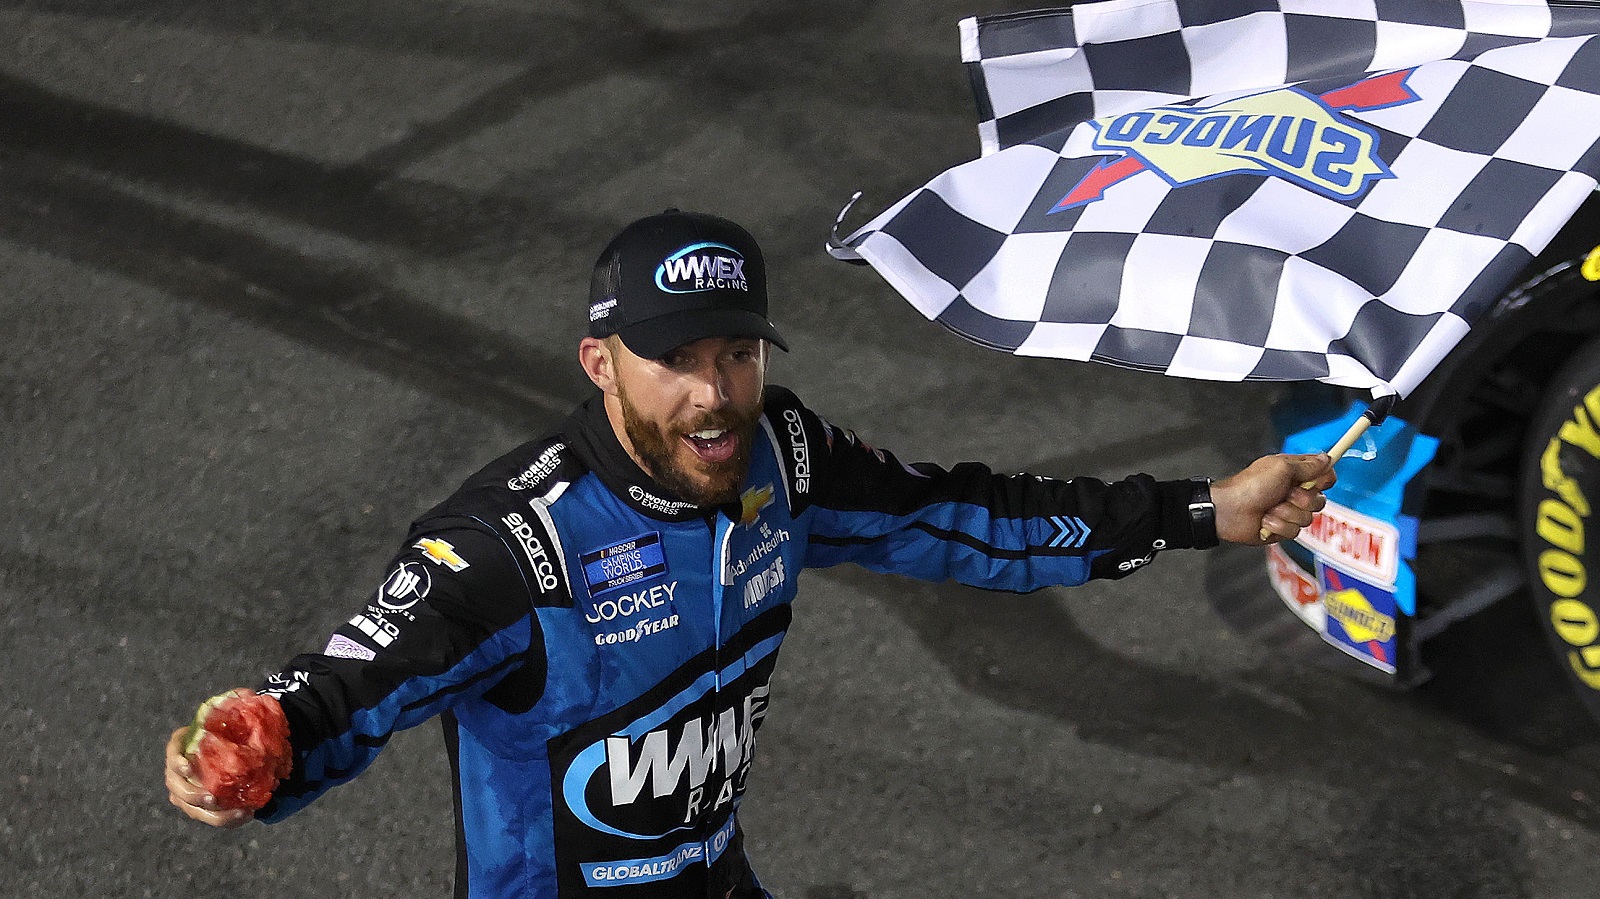 Ross Chastain celebrates with the checkered flag after winning the NASCAR Camping World Truck Series North Carolina Education Lottery 200 at Charlotte Motor Speedway on May 27, 2022. | James Gilbert/Getty Images